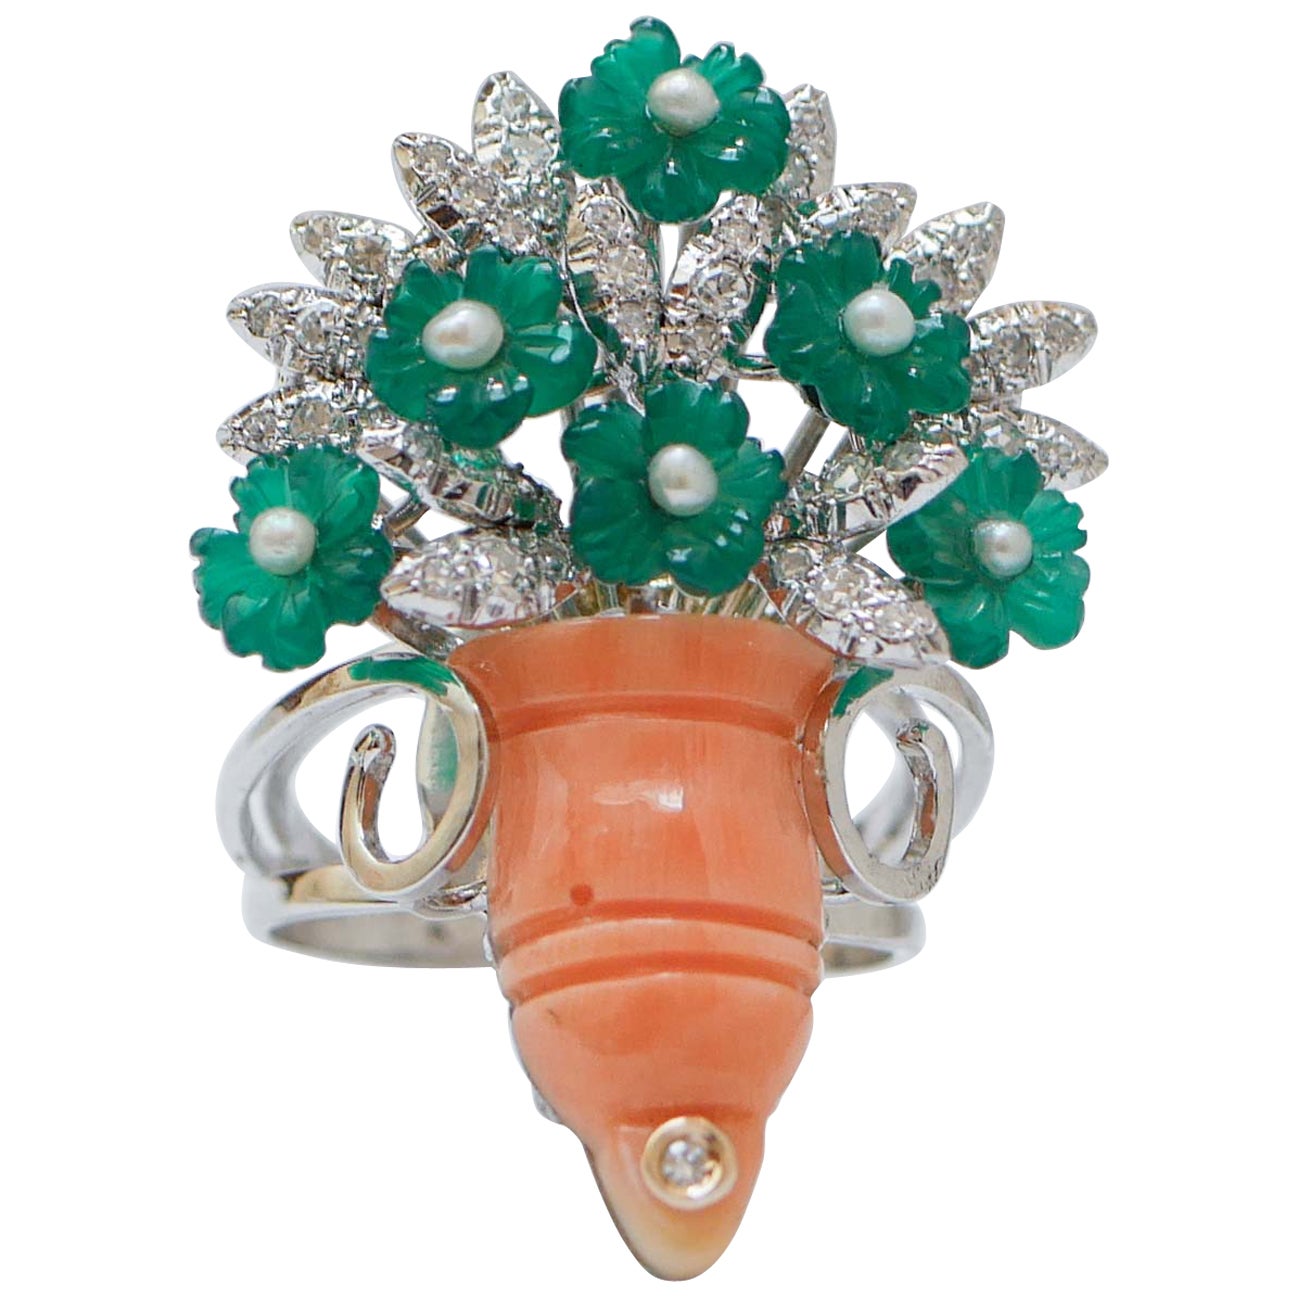 Coral, Pearls, Diamonds, Green Agate, 14 Karat White Gold Ring. For Sale